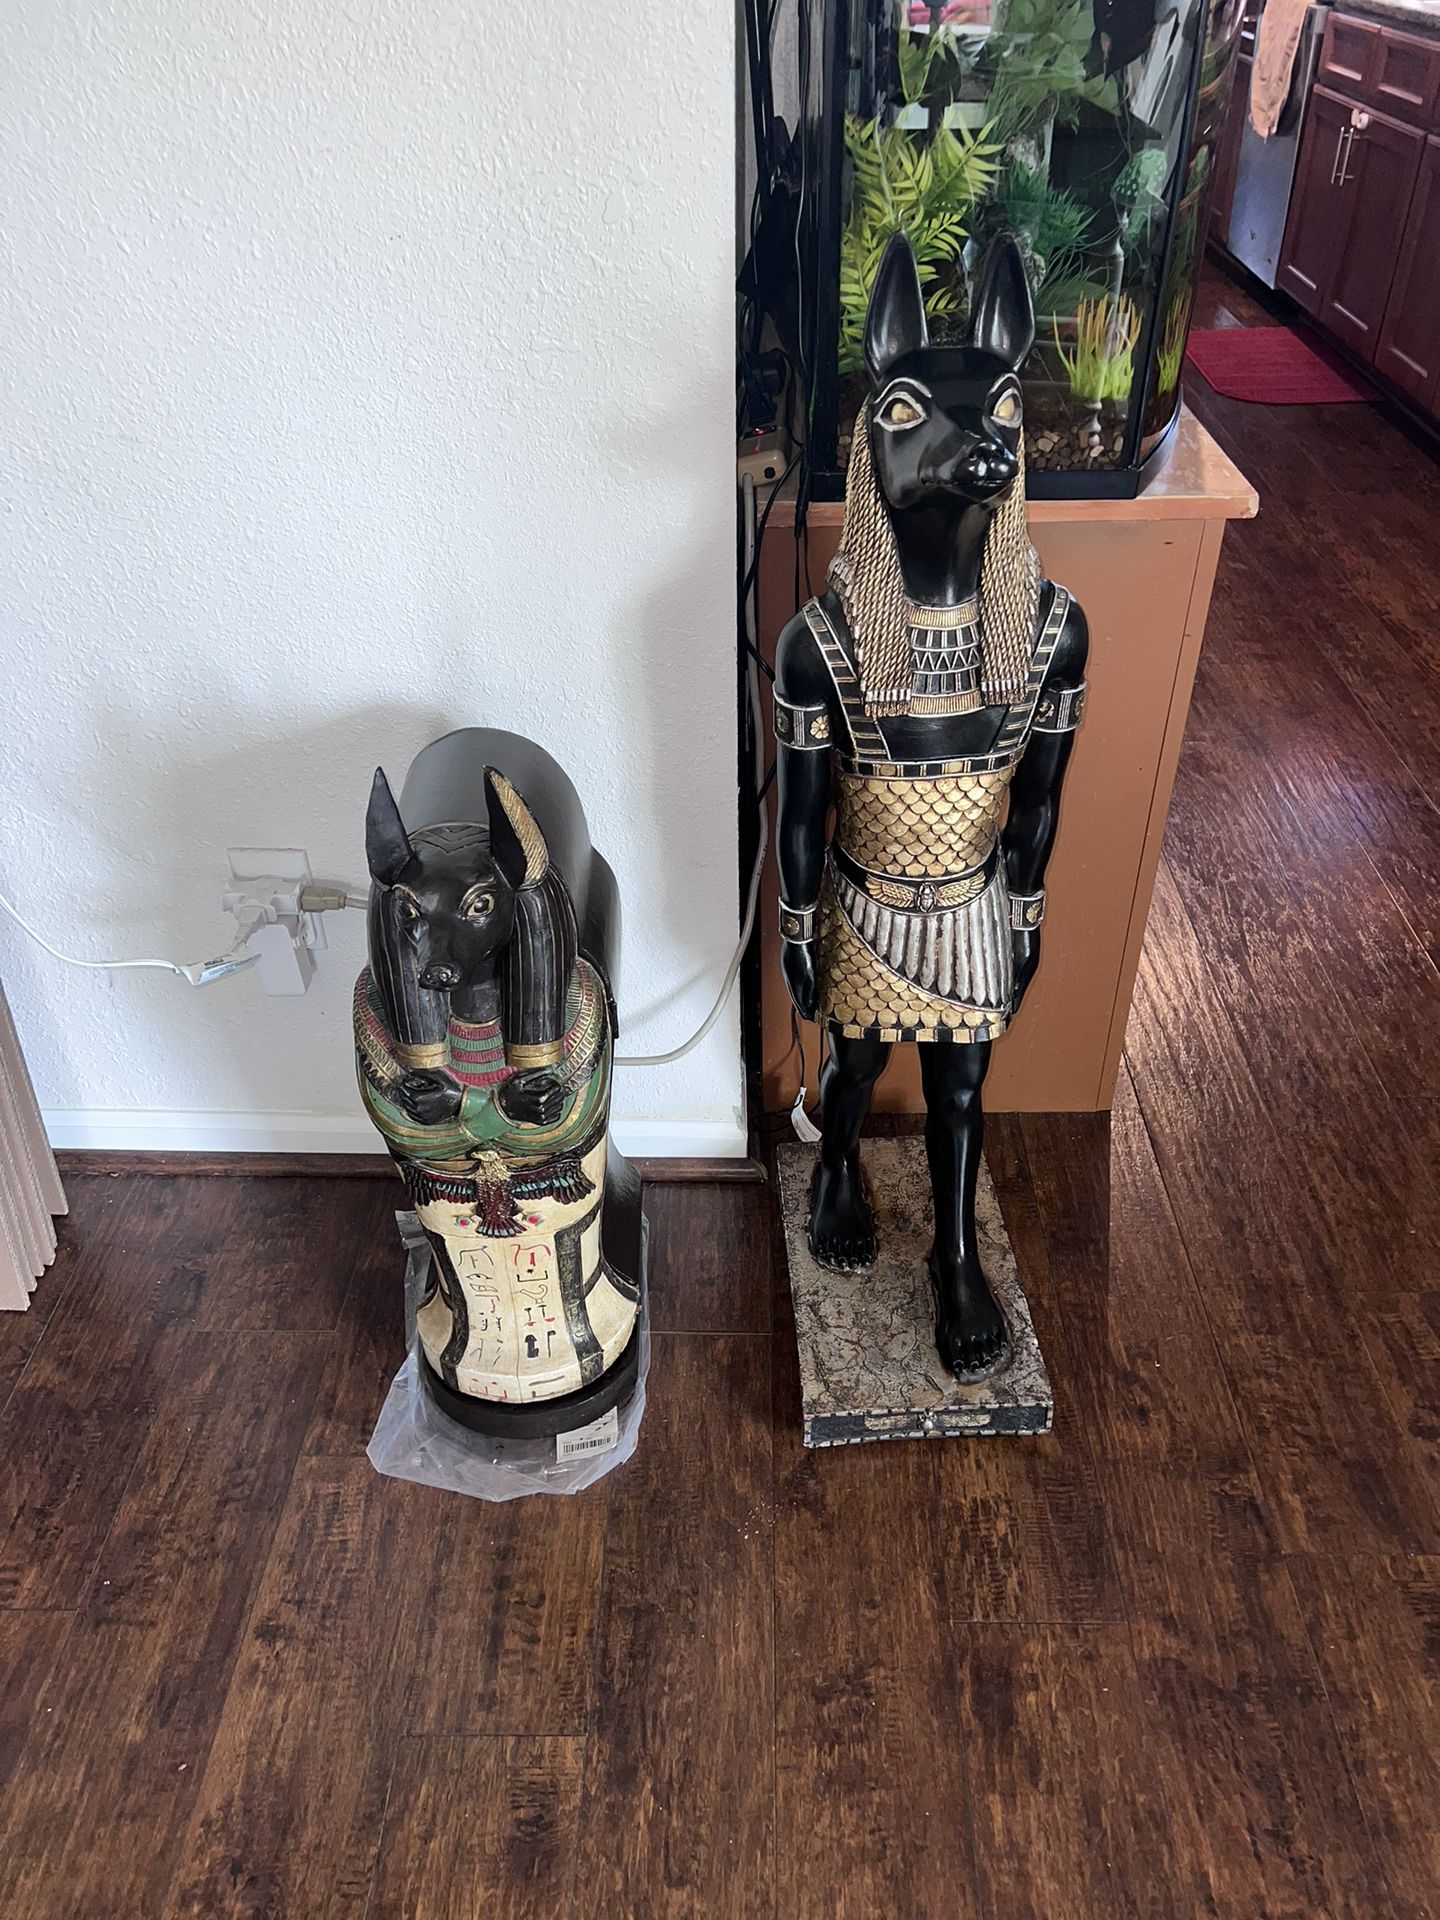 $40 for Both- Egyptian Decor 28 Inches And 41 Inches